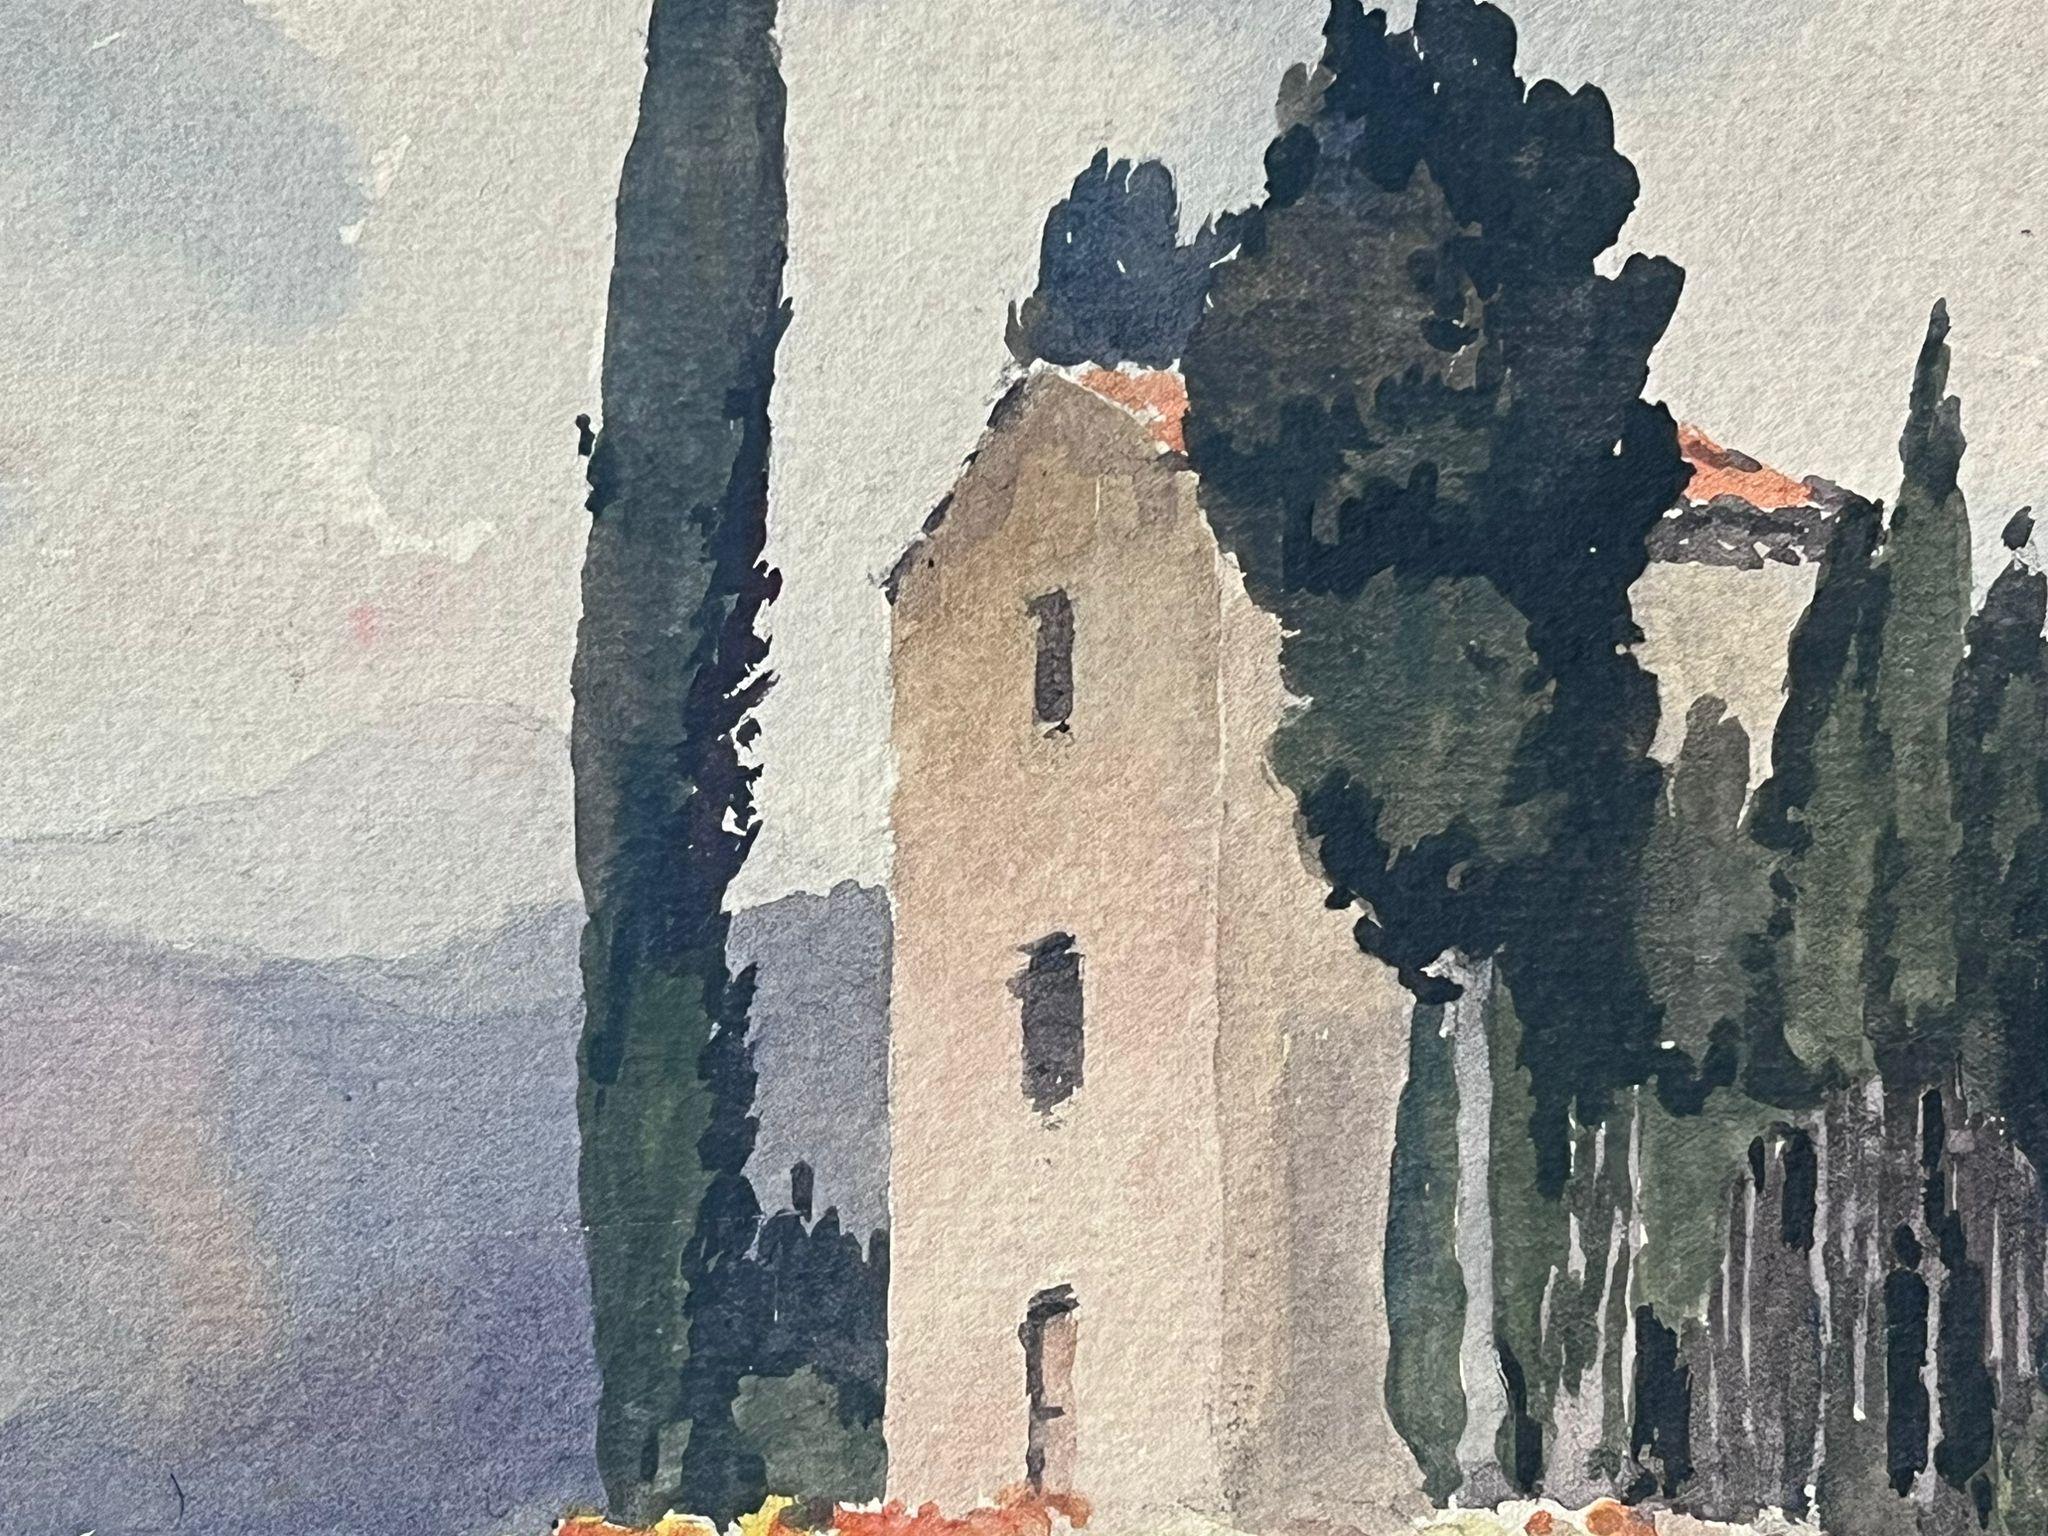 Jean La Forgue (French 1901-1975) signed watercolour on paper, unframed
inscribed verso
painting: 9 x 11 inches
provenance: the artists estate, France
condition: very good and sound condition; there are minor age related marks and stains to the